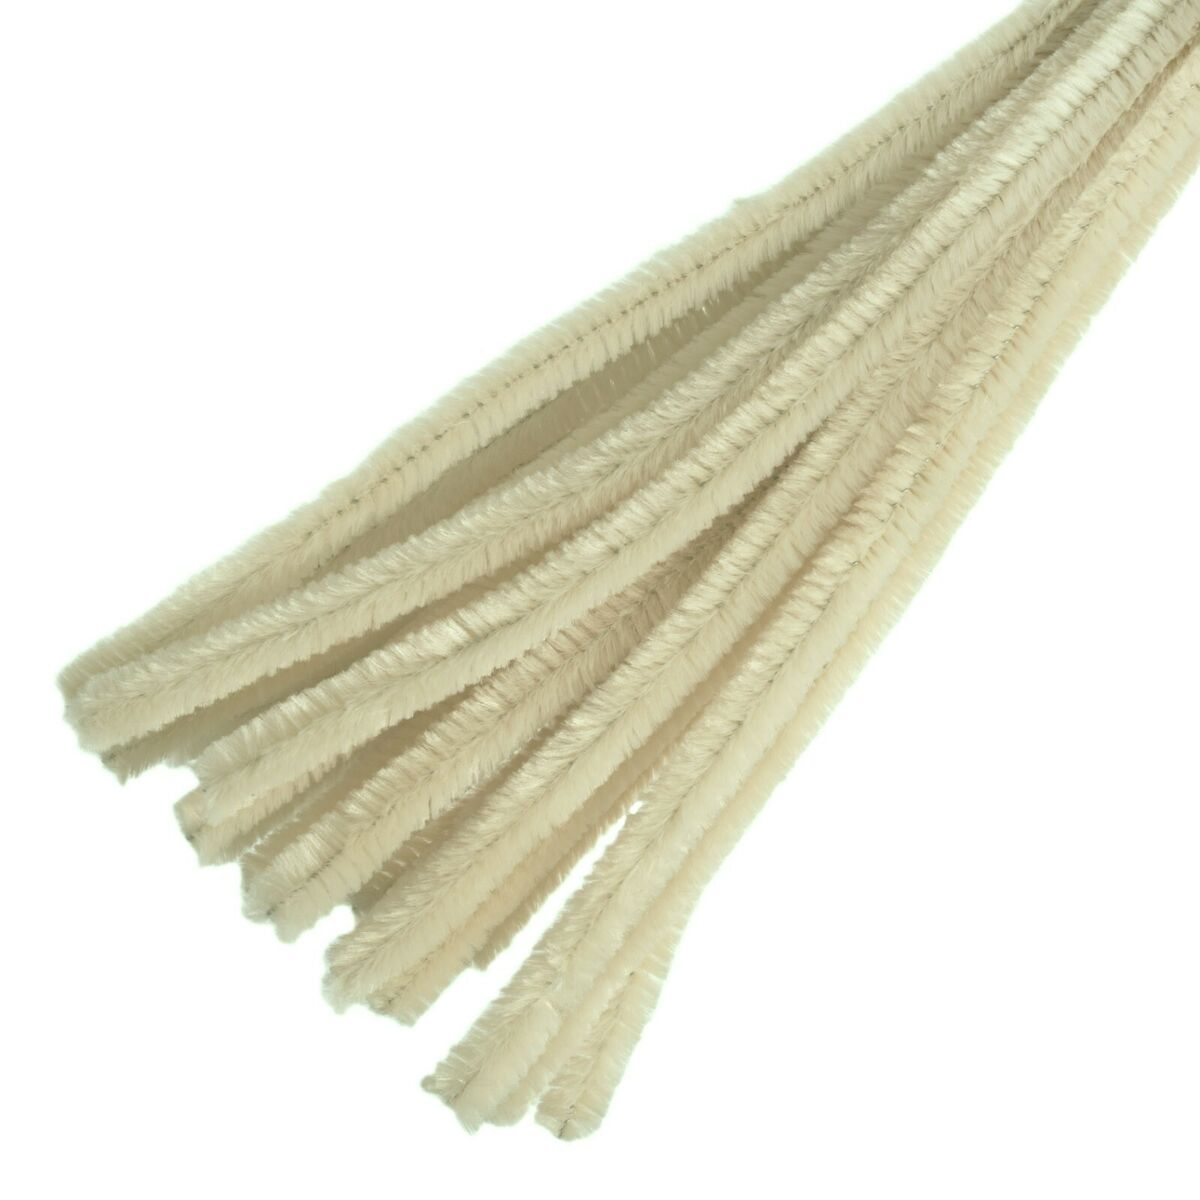 Chenille Pipe Cleaners, Chenille Stems, Chenille Toys